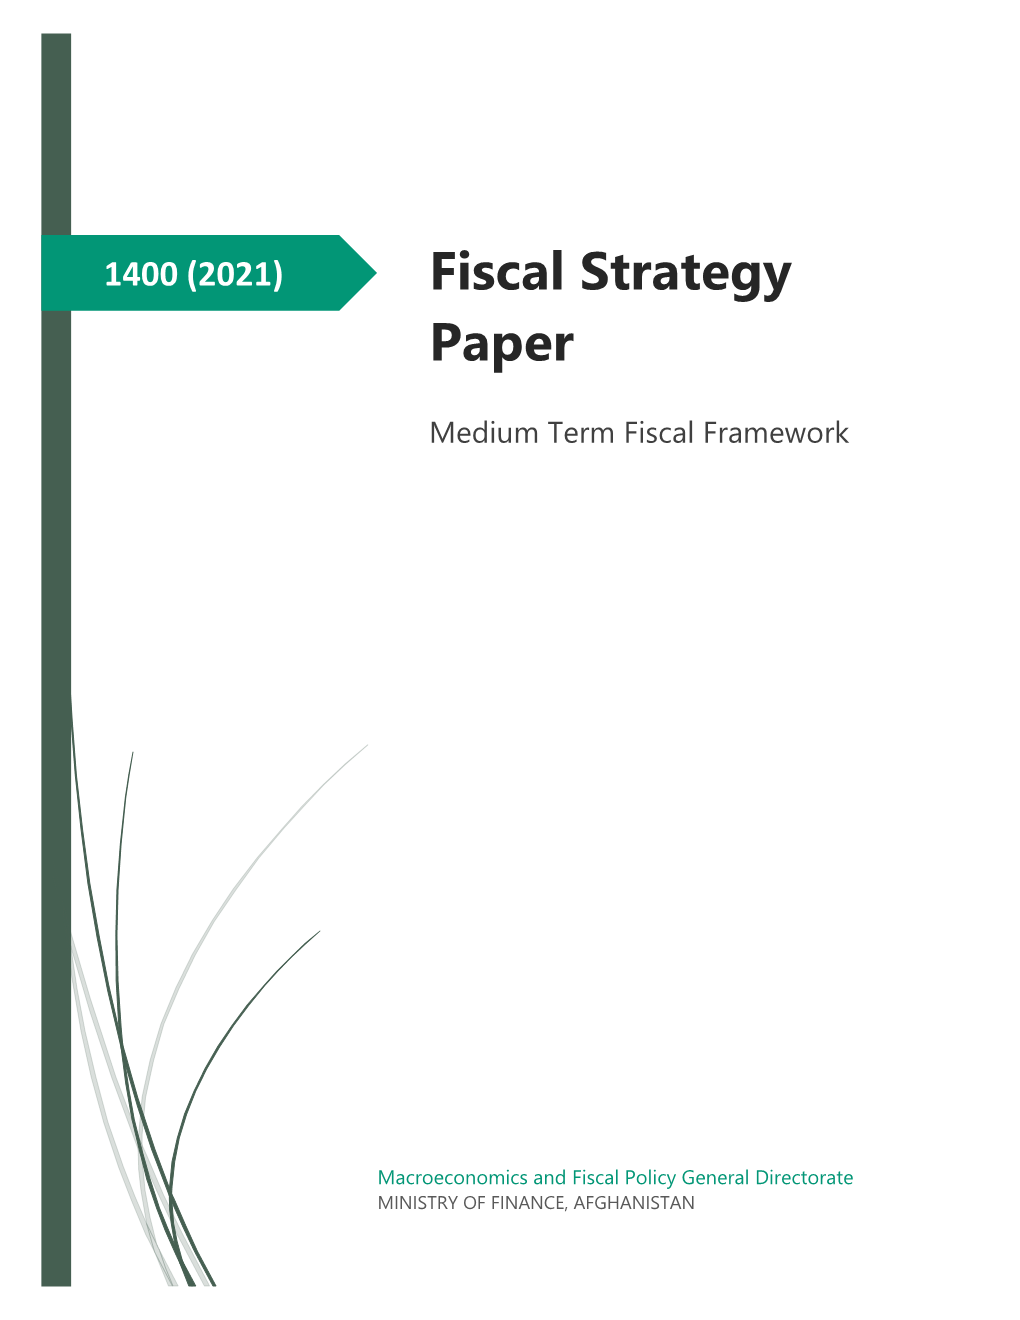 Fiscal Strategy Paper